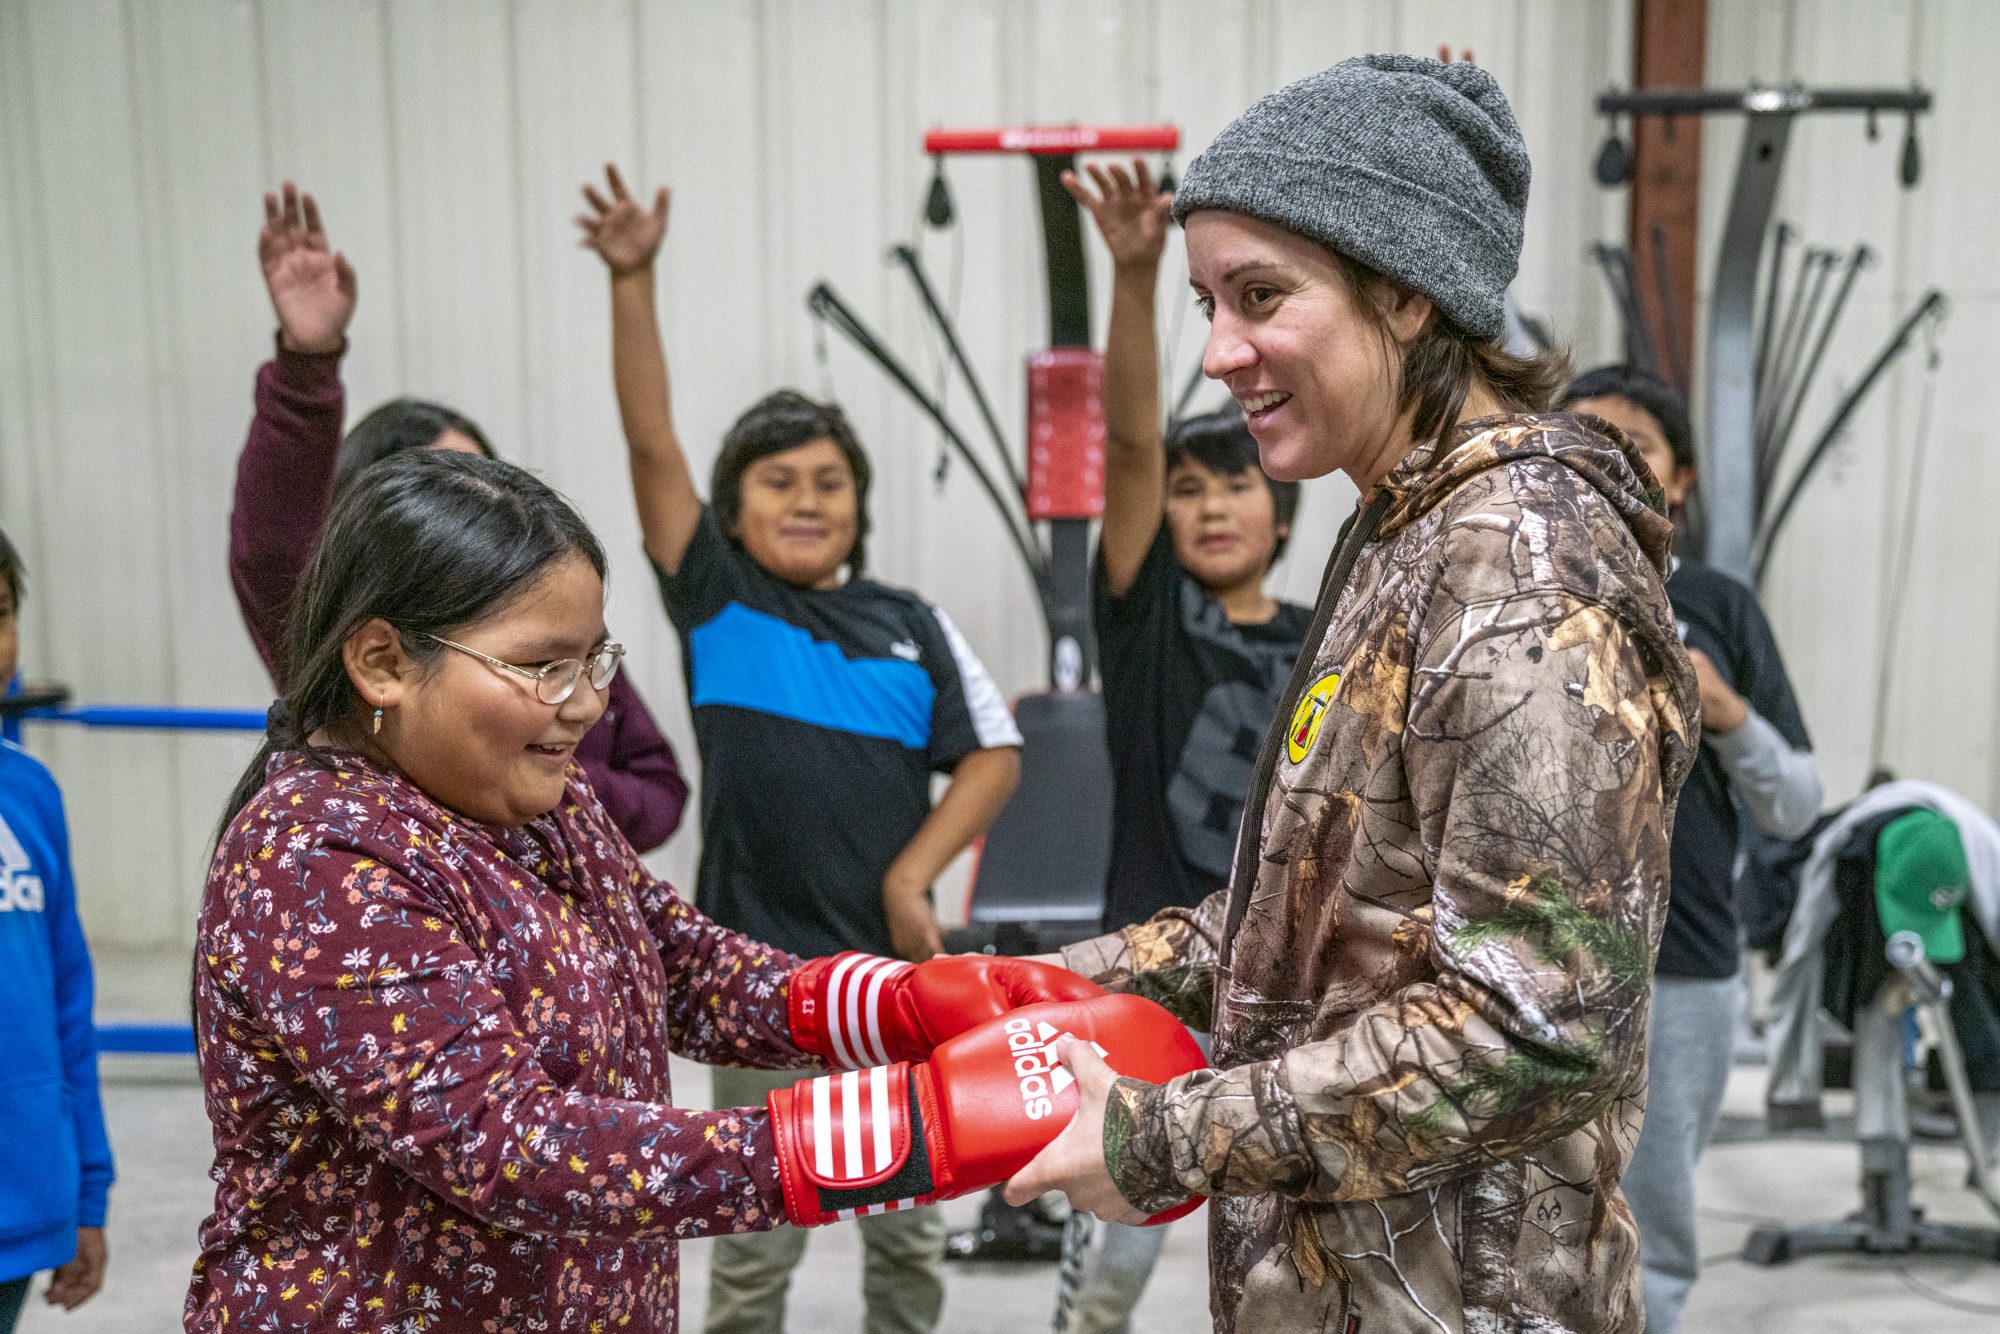 Mary Spencer shares her boxing gloves with a young student